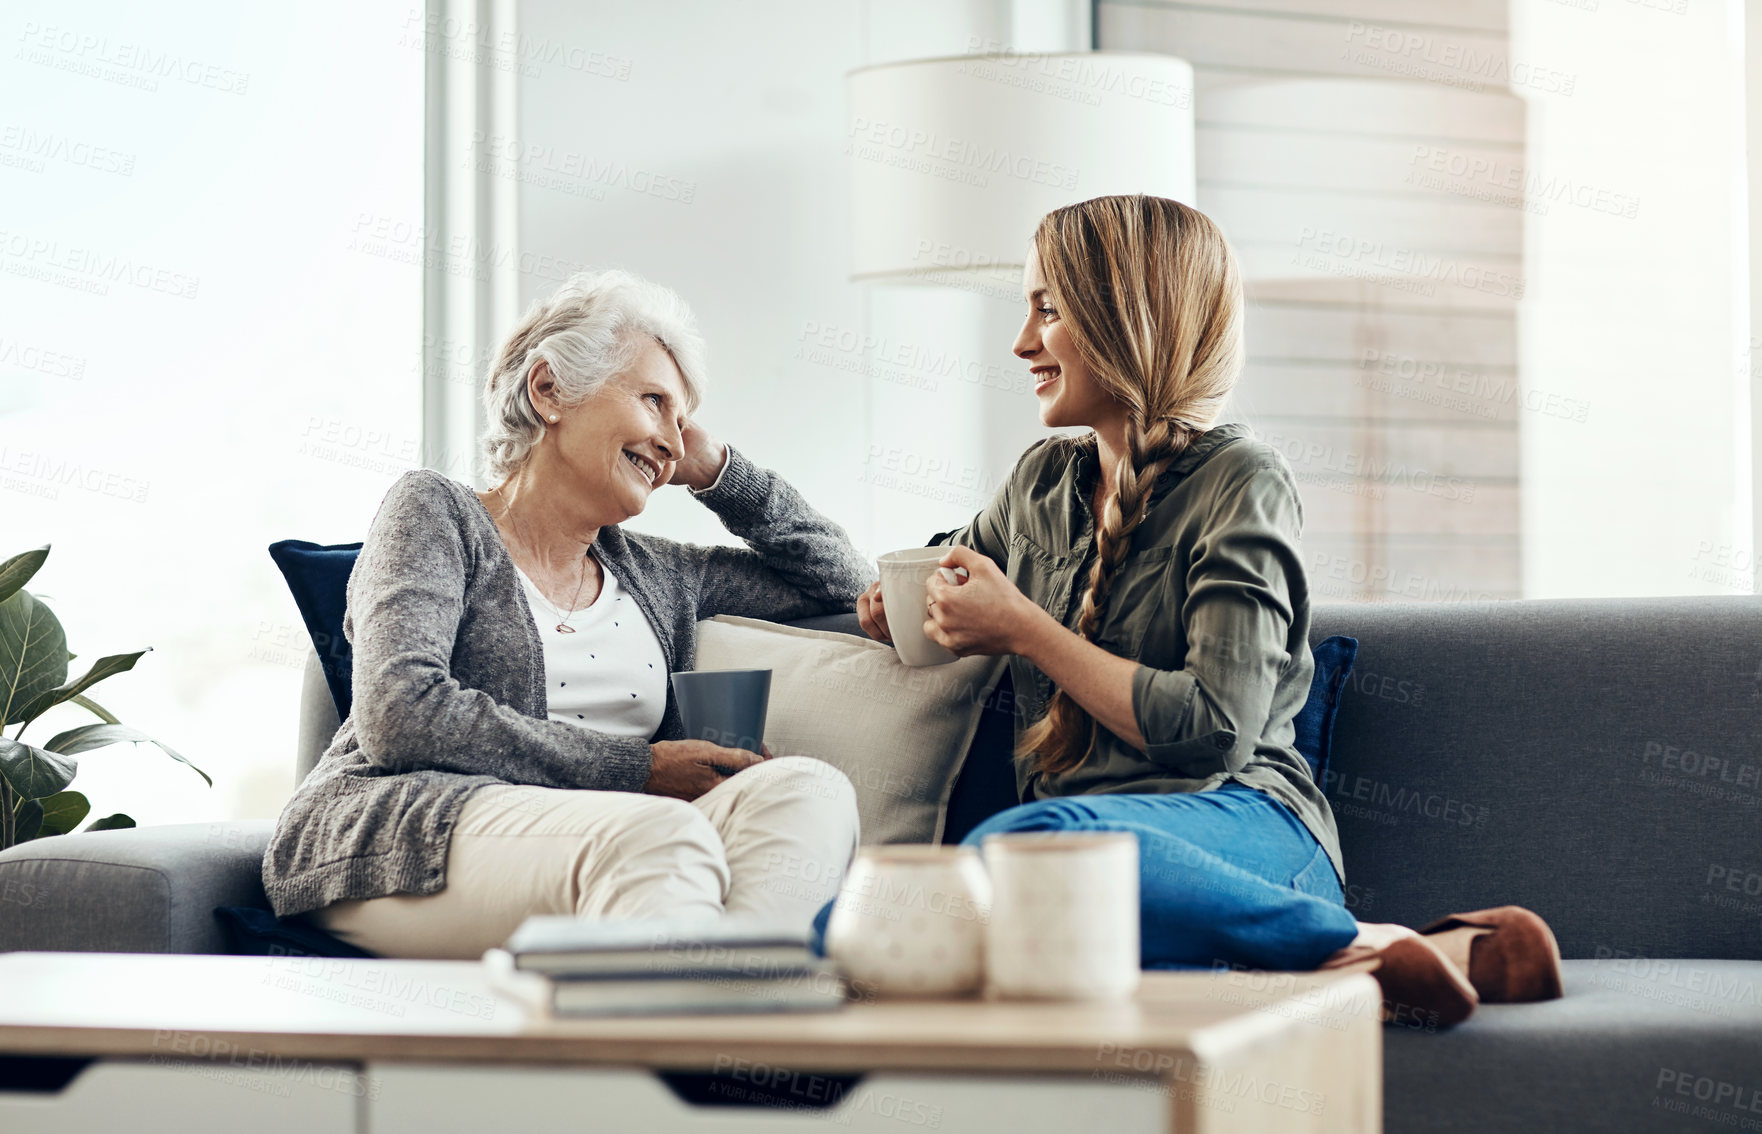 Buy stock photo Cropped shot of a senior woman and her adult daughter sitting together at home